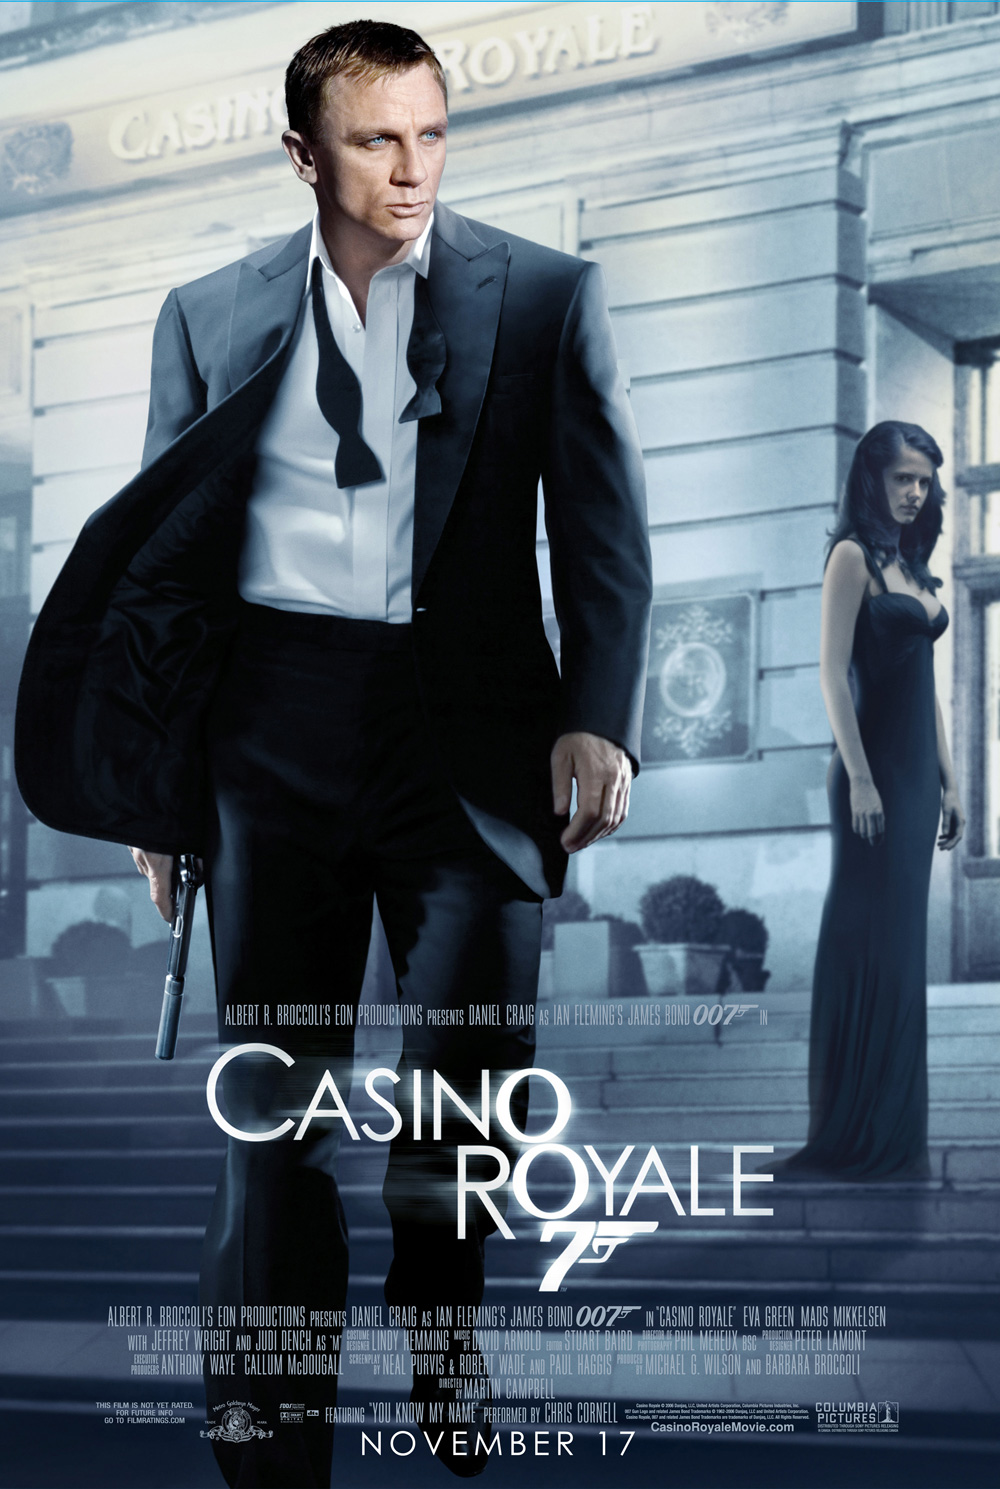 Agent 007(That's me!) Has Arrived Casino-royale